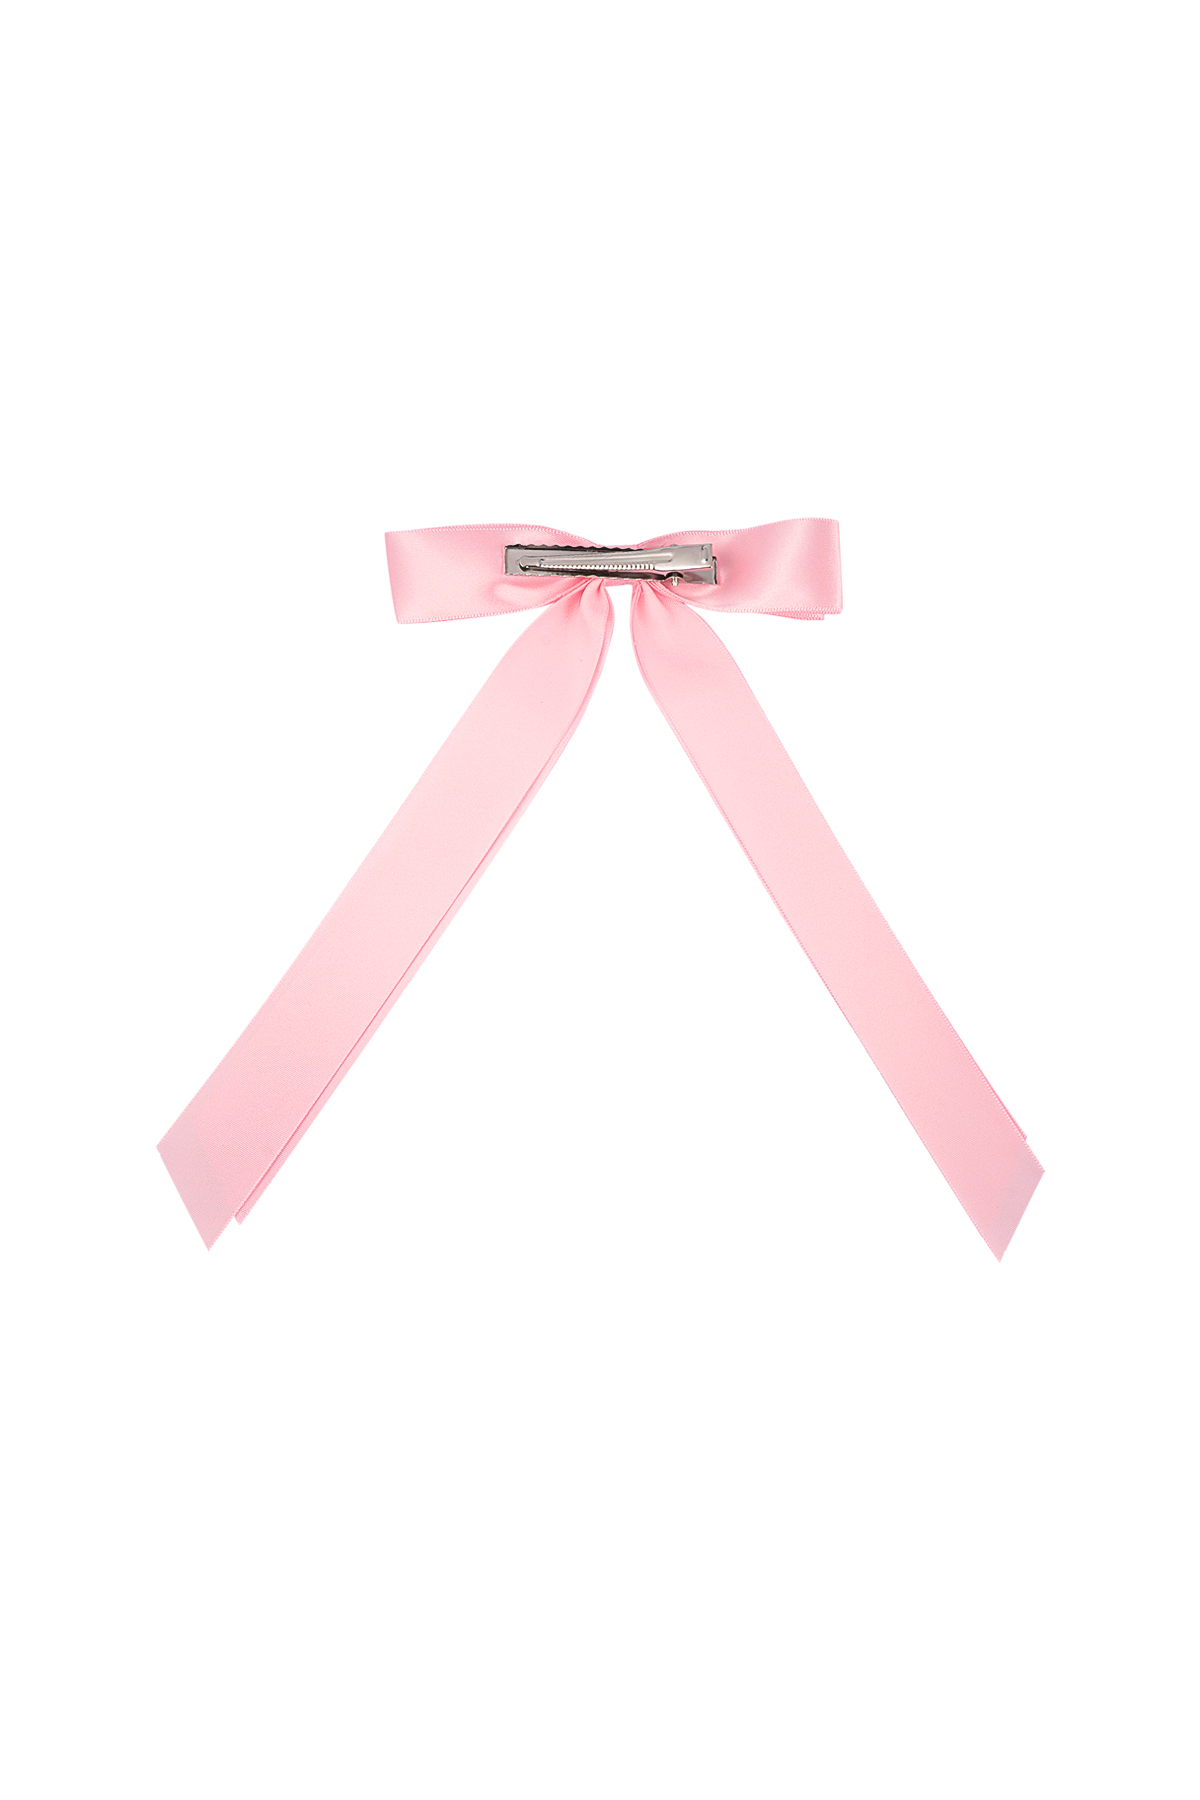 Cute hair bow - pink h5 Picture4